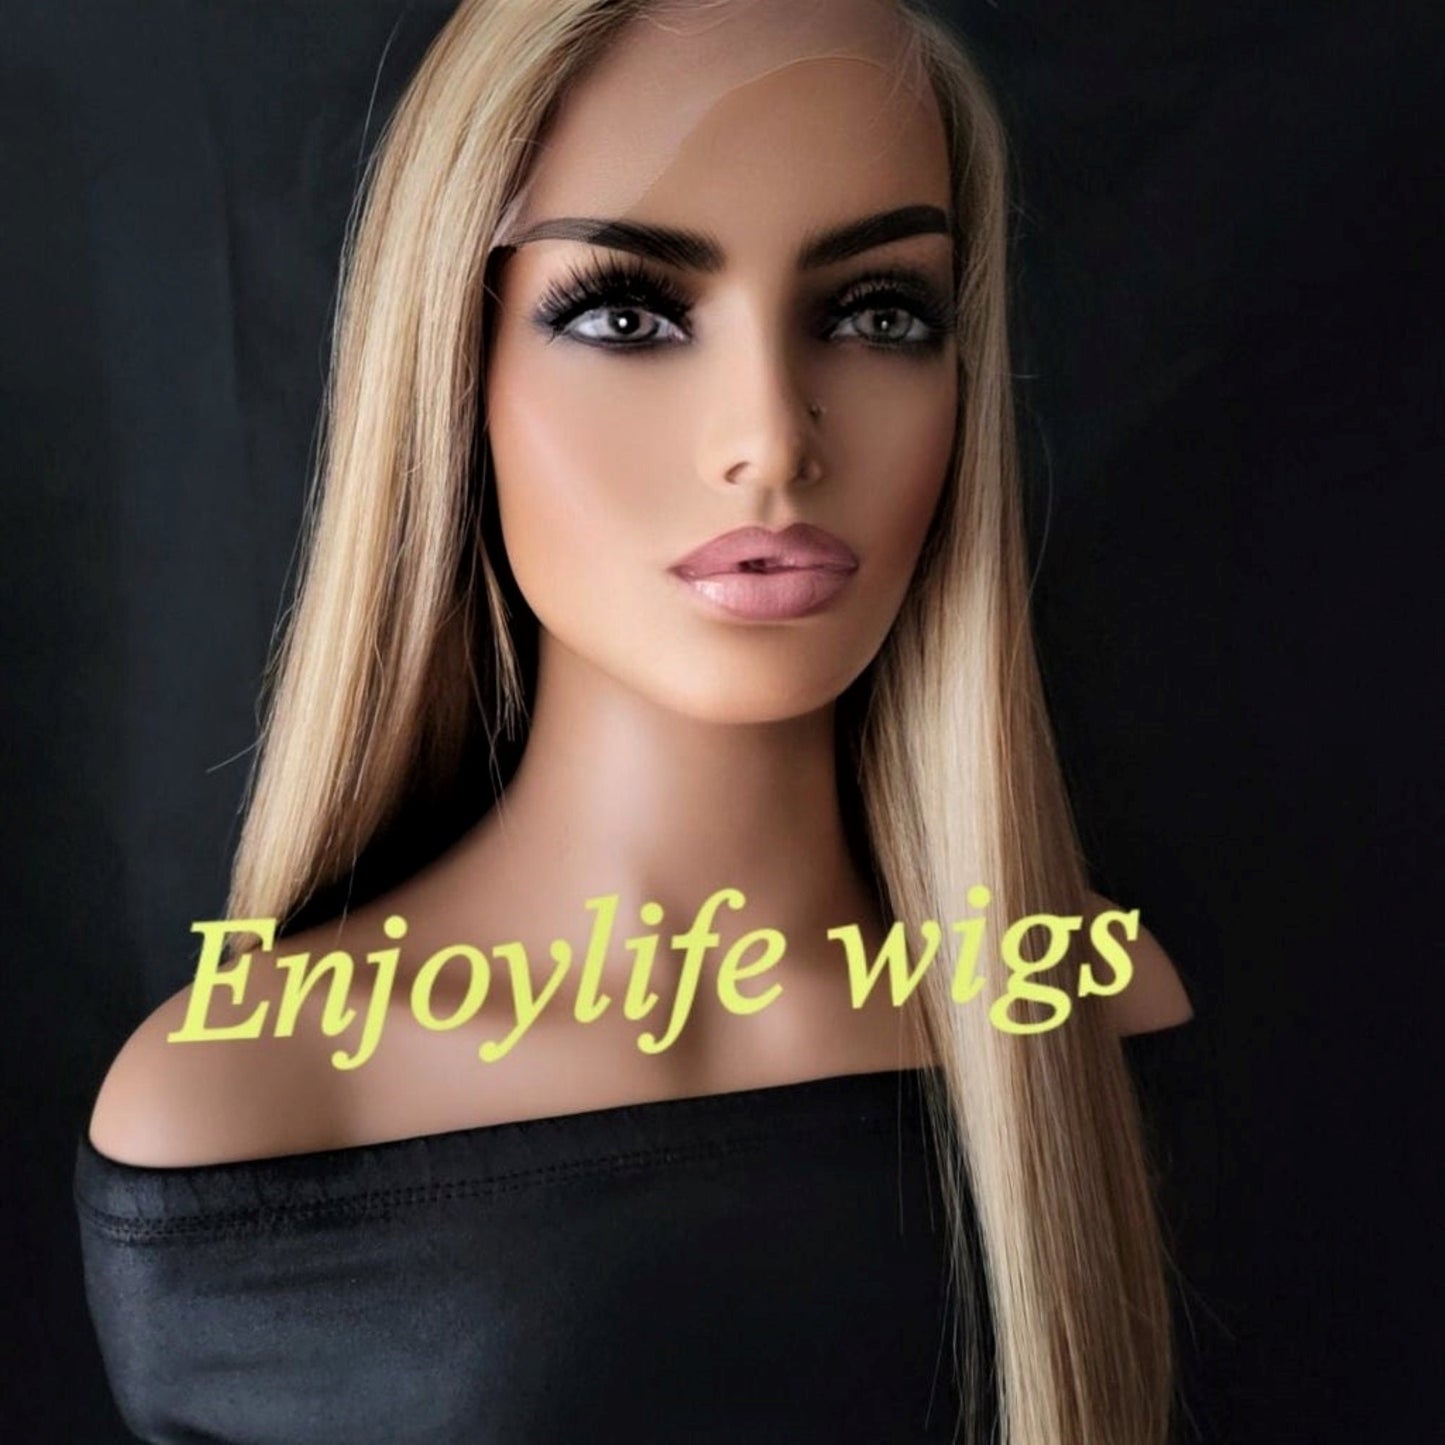 triple gold crush straight blonde lace front wig with balayage honey highlights